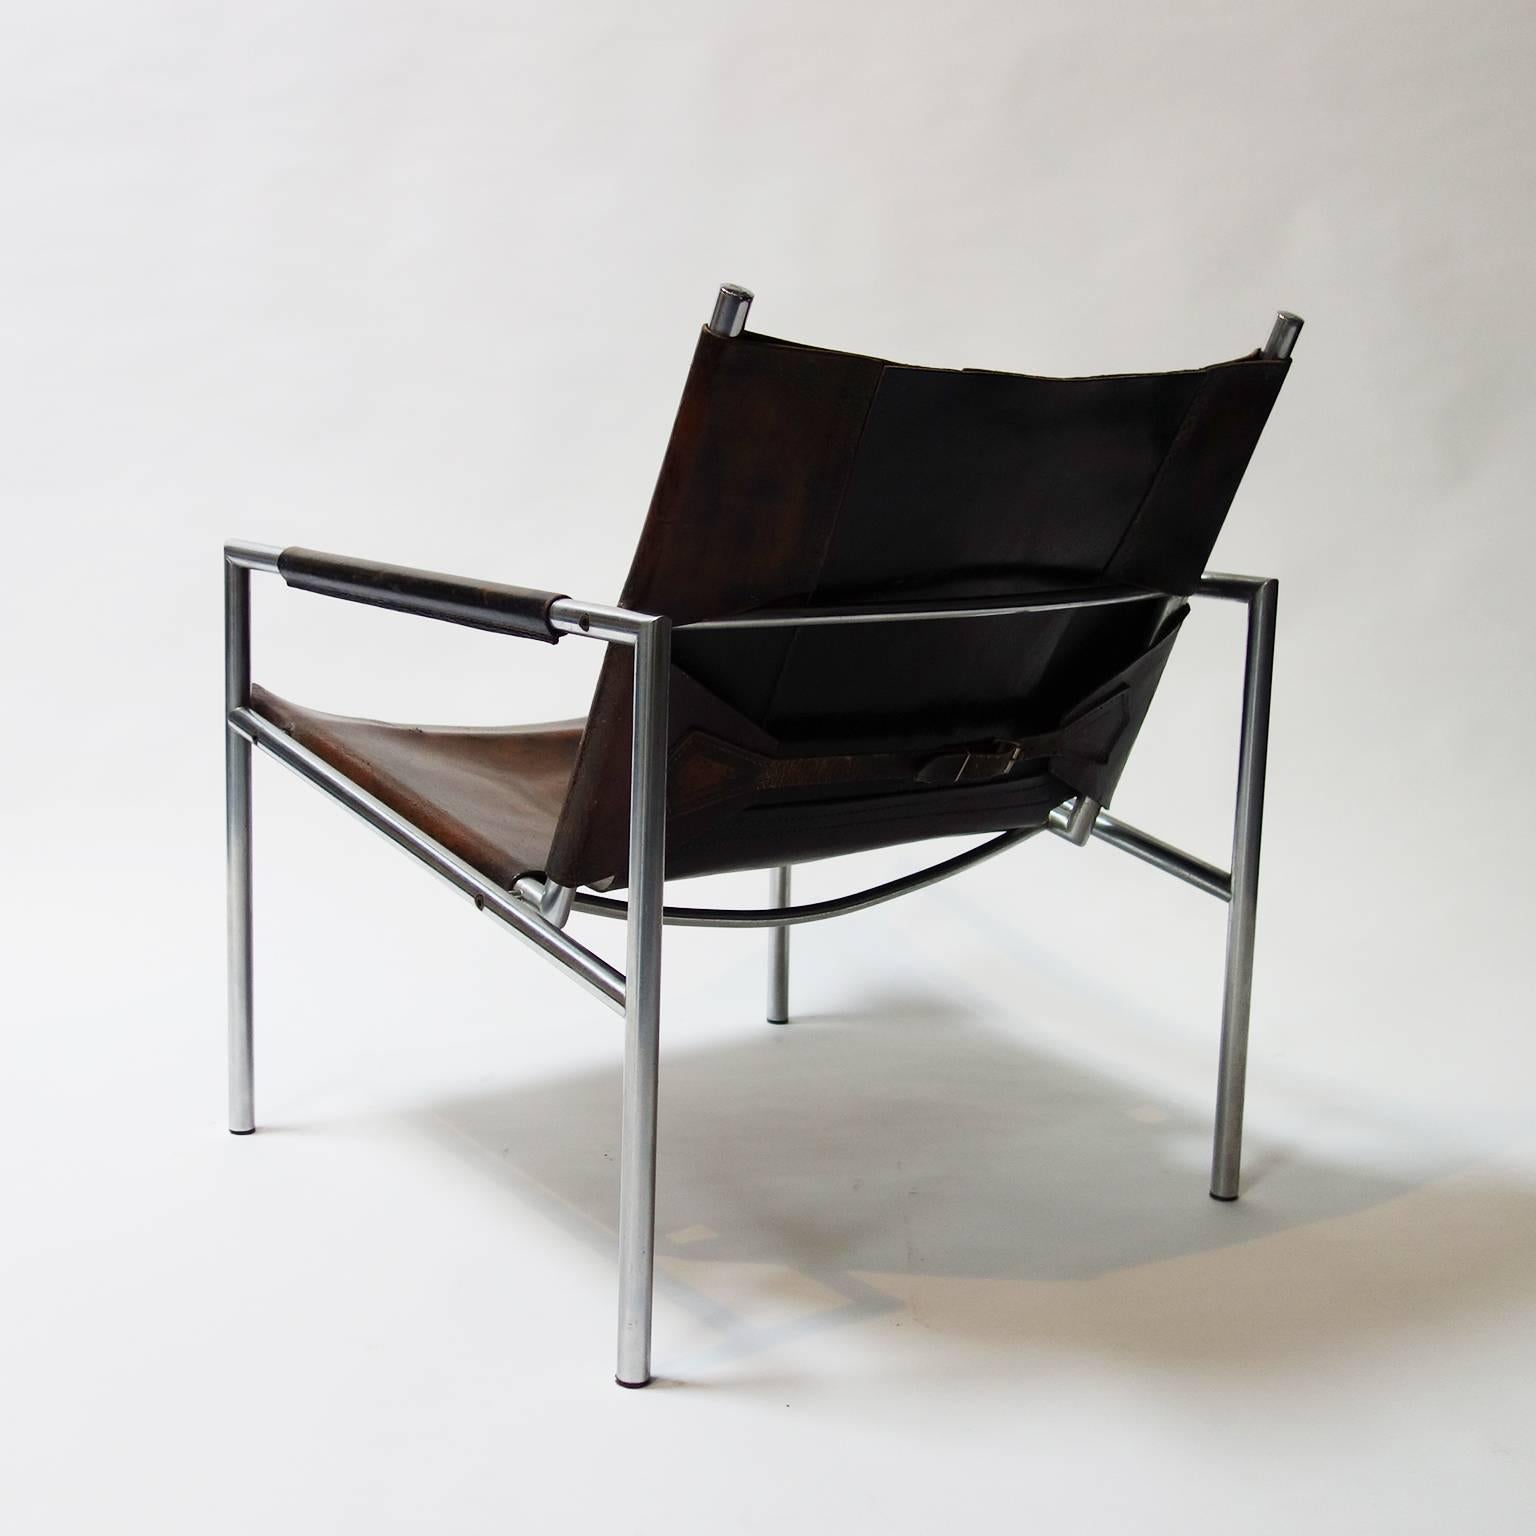 Brushed Pair of Lounge Chair Model 'SZ02' by Martin Visser for 't Spectrum Bergeijk